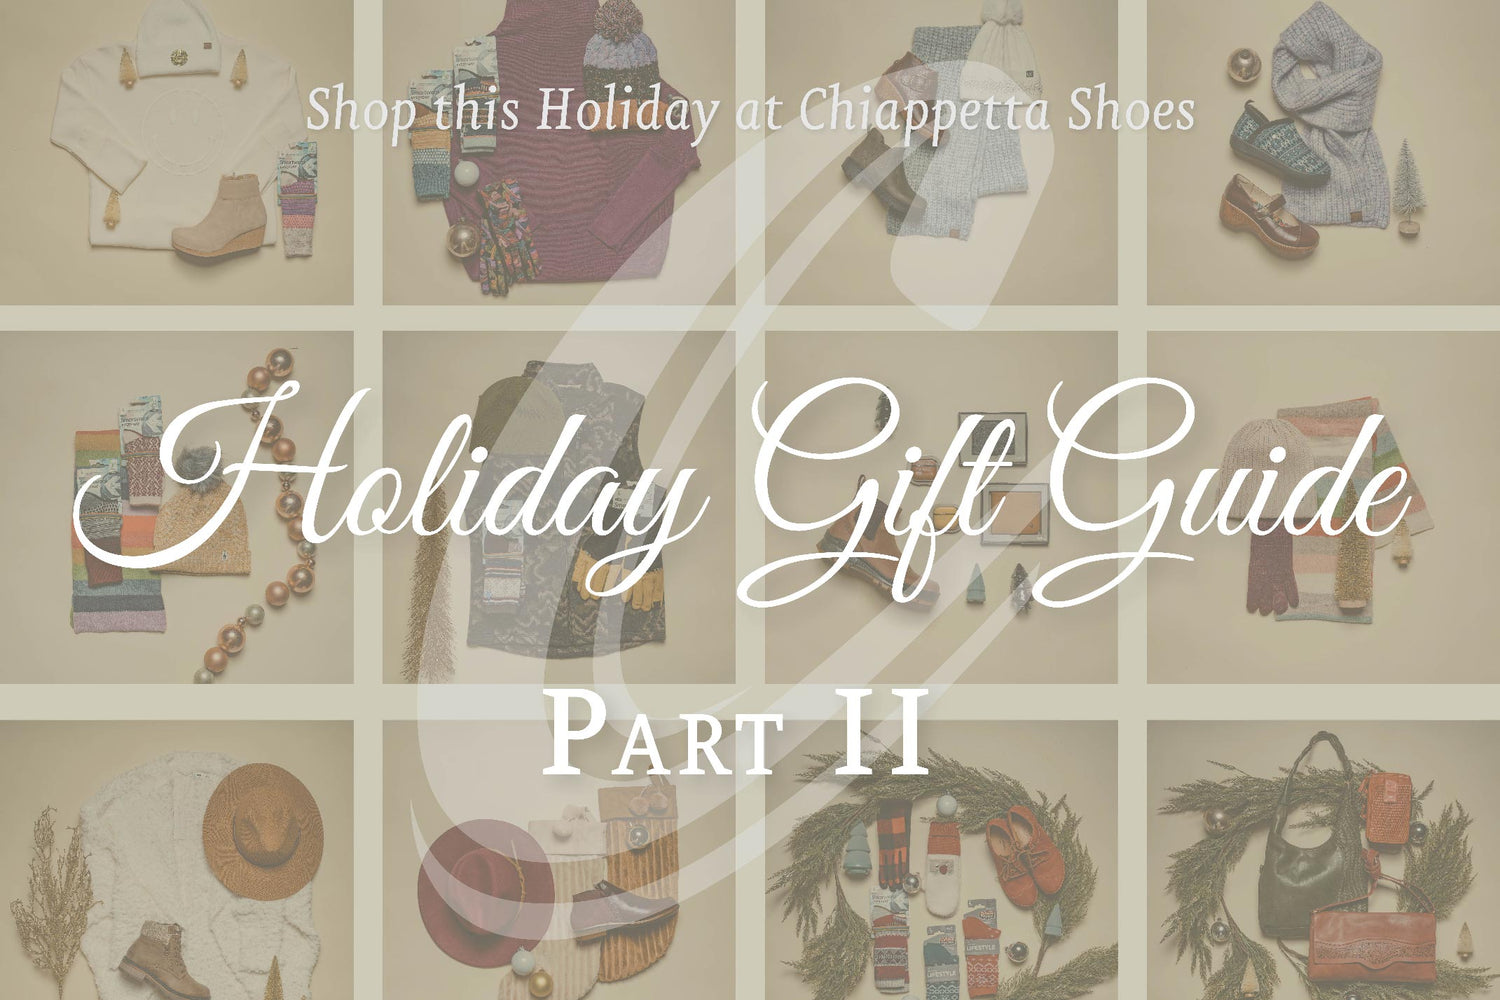 FW23 Holiday Gift Guide Part II at Chiappetta Shoes